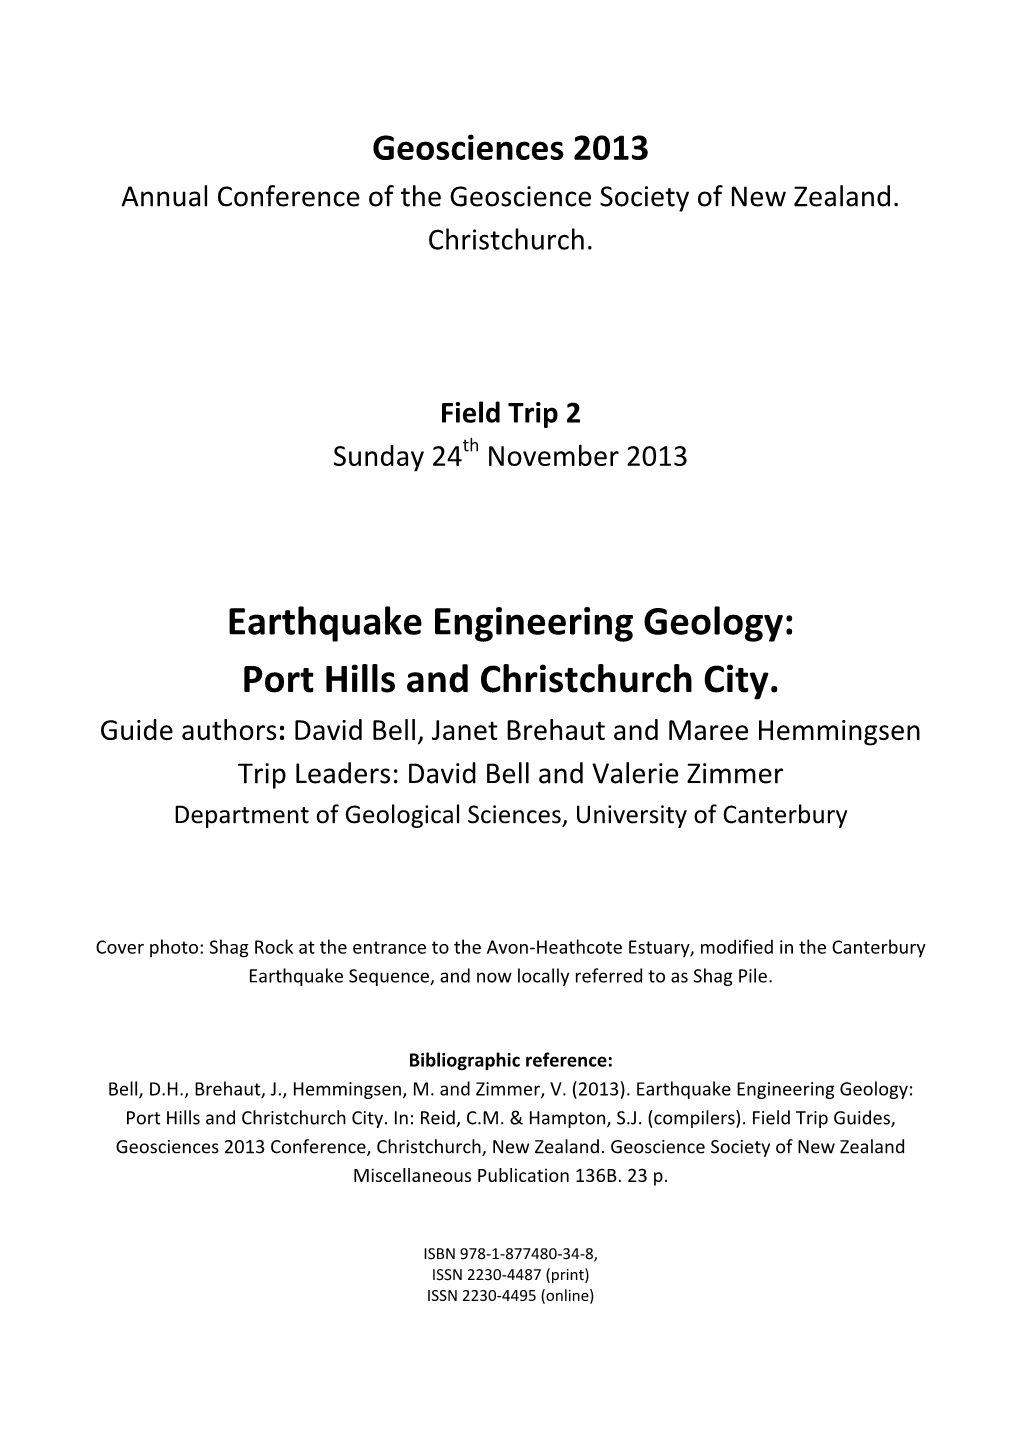 FT2 Earthquake Engineering Geology: Port Hills and Christchurch City